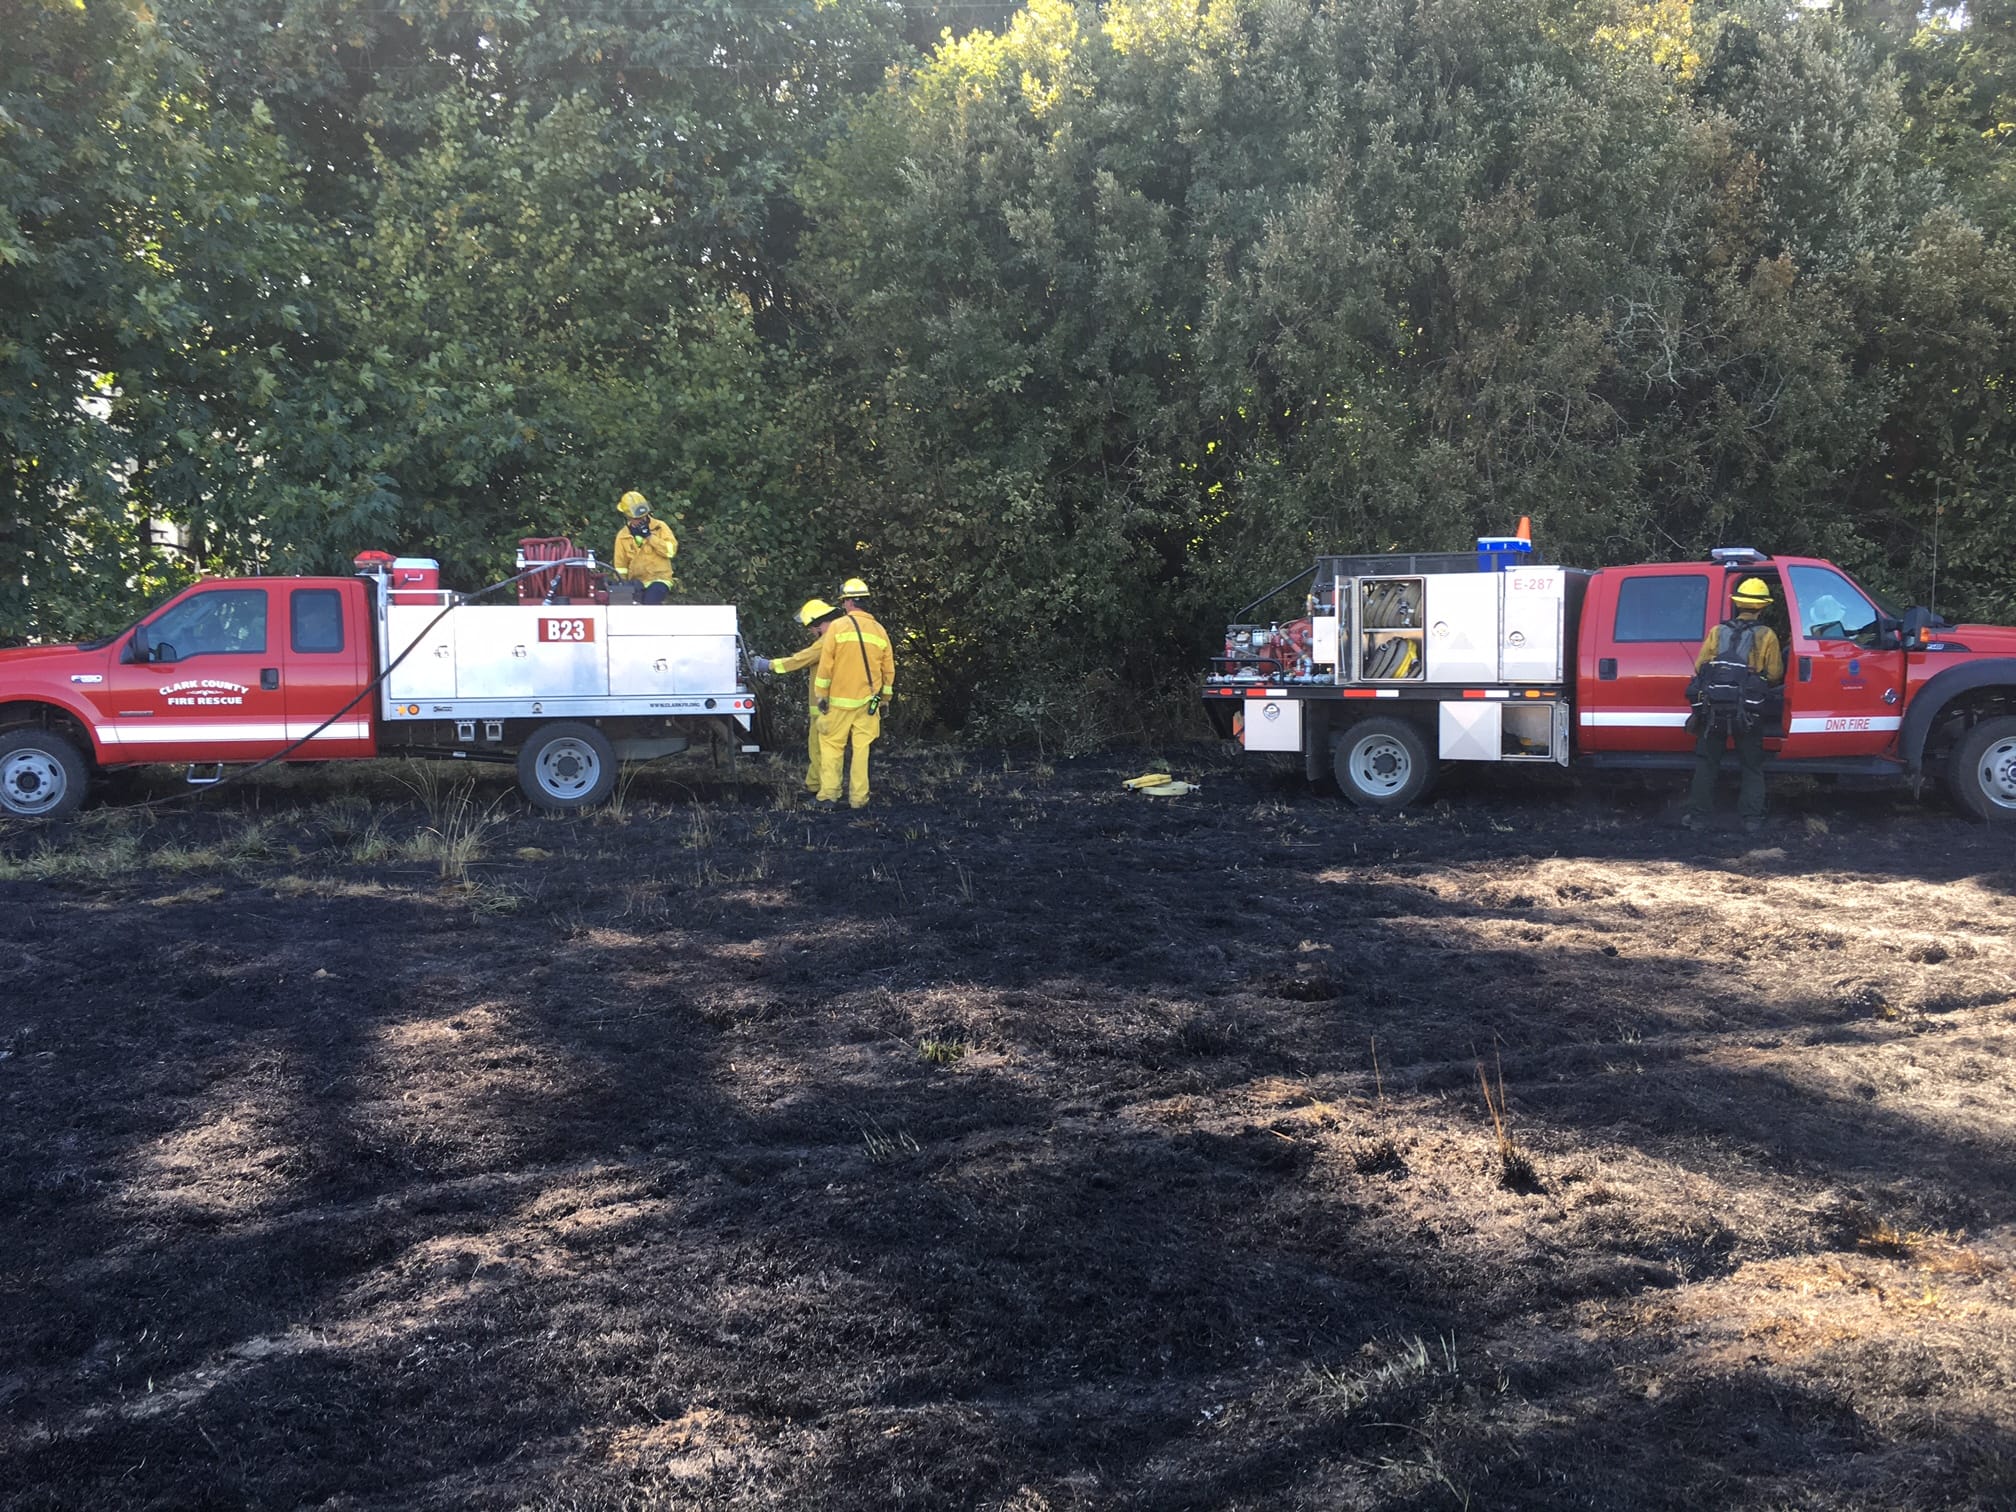 Firefighters respond to a brush fire north of Ridgefield Friday afternoon.